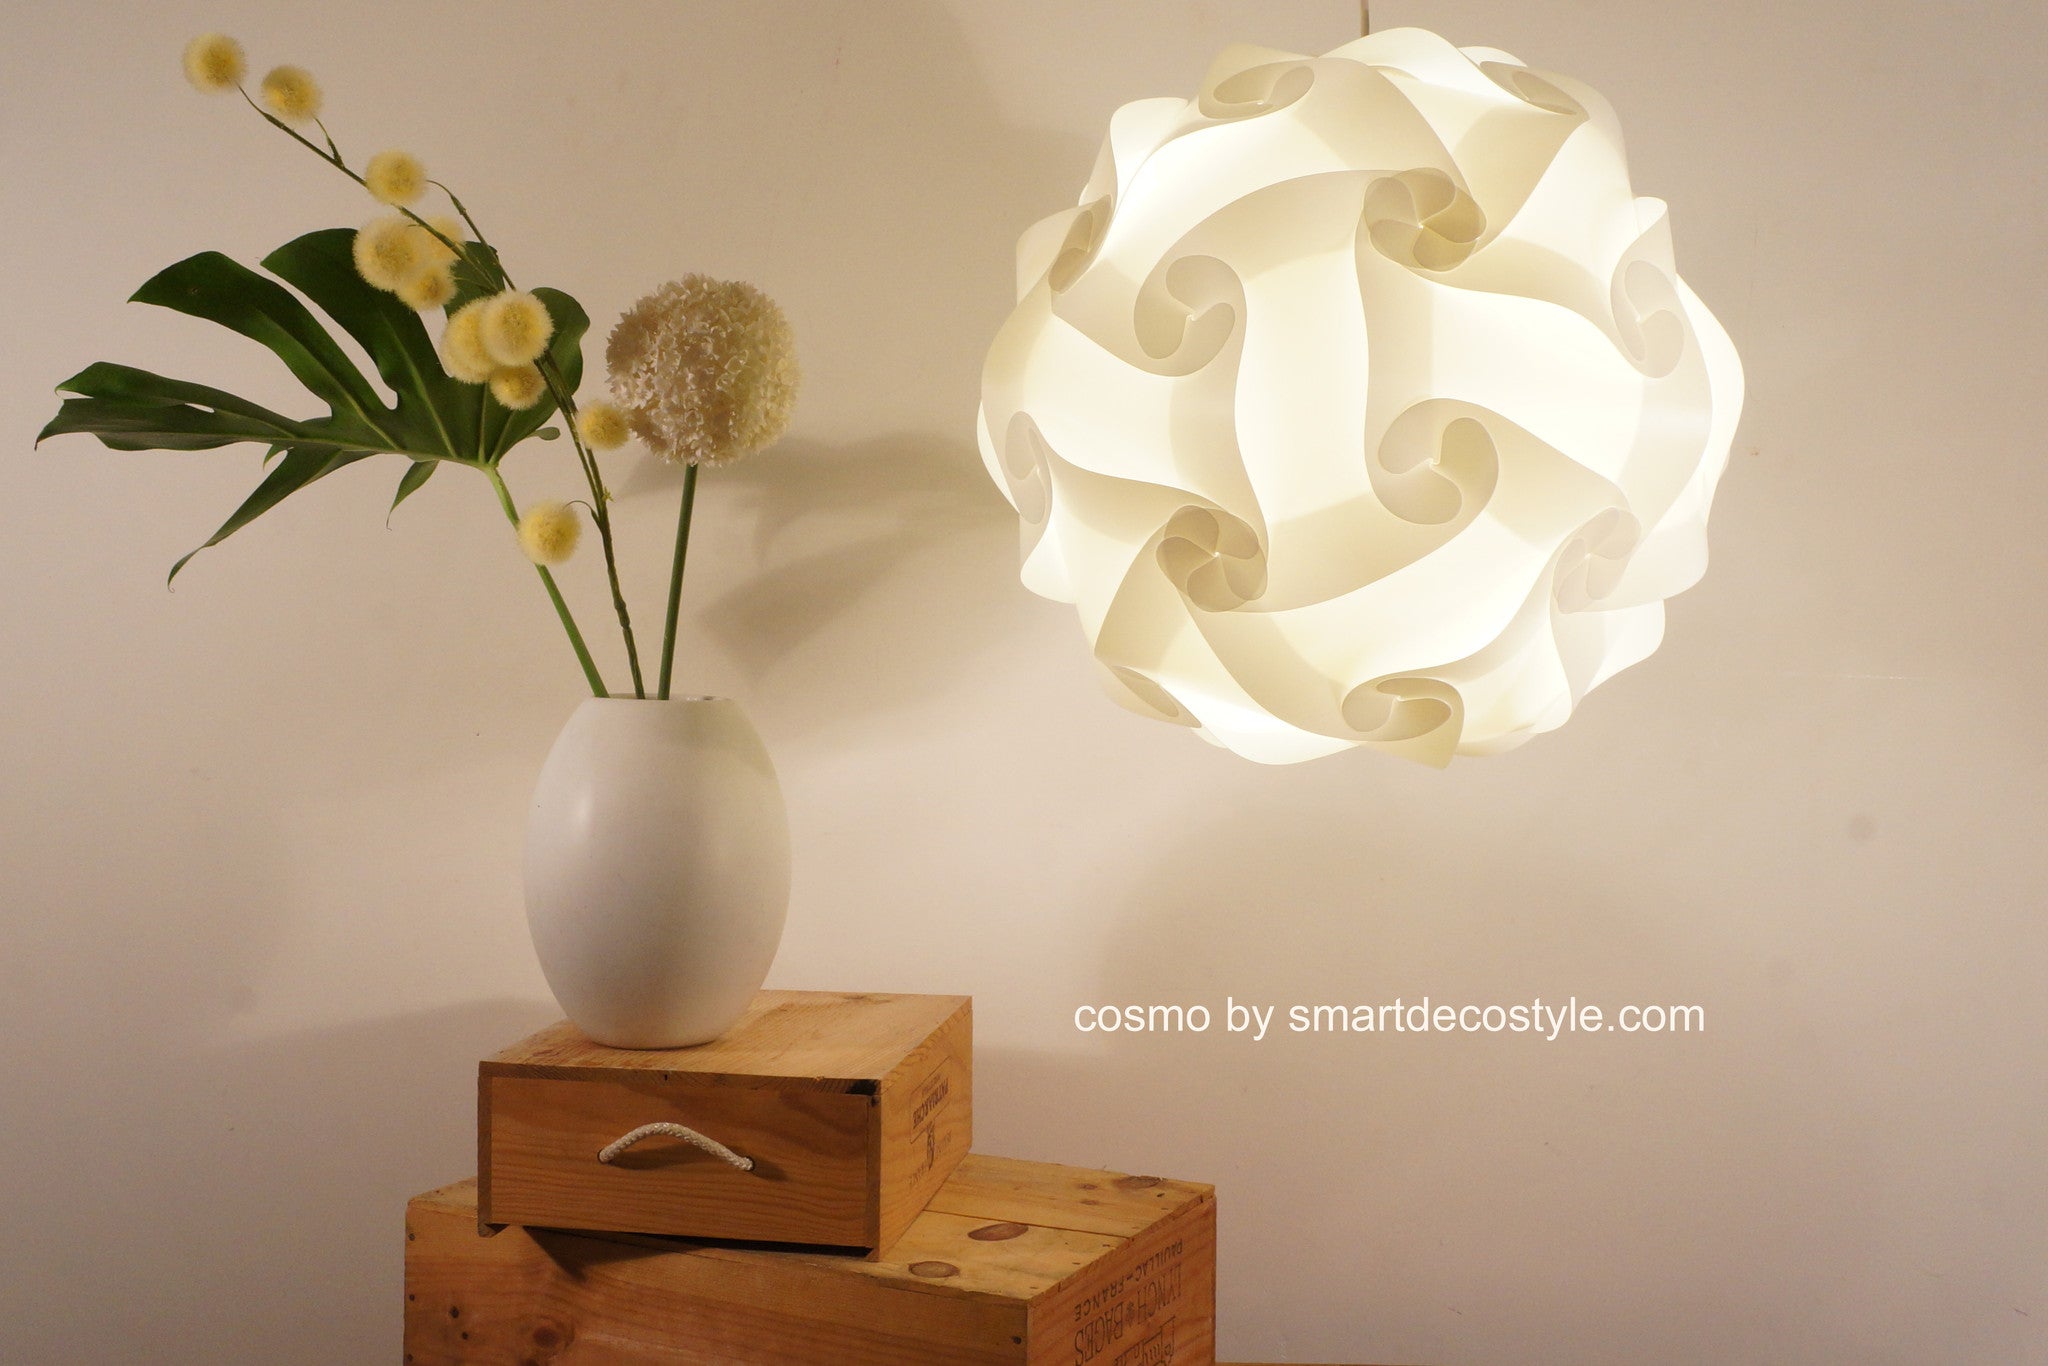 Smarty Lamps Cosmo Light Shade  Smart Deco Homeware Lighting and Art by Jacqueline hammond